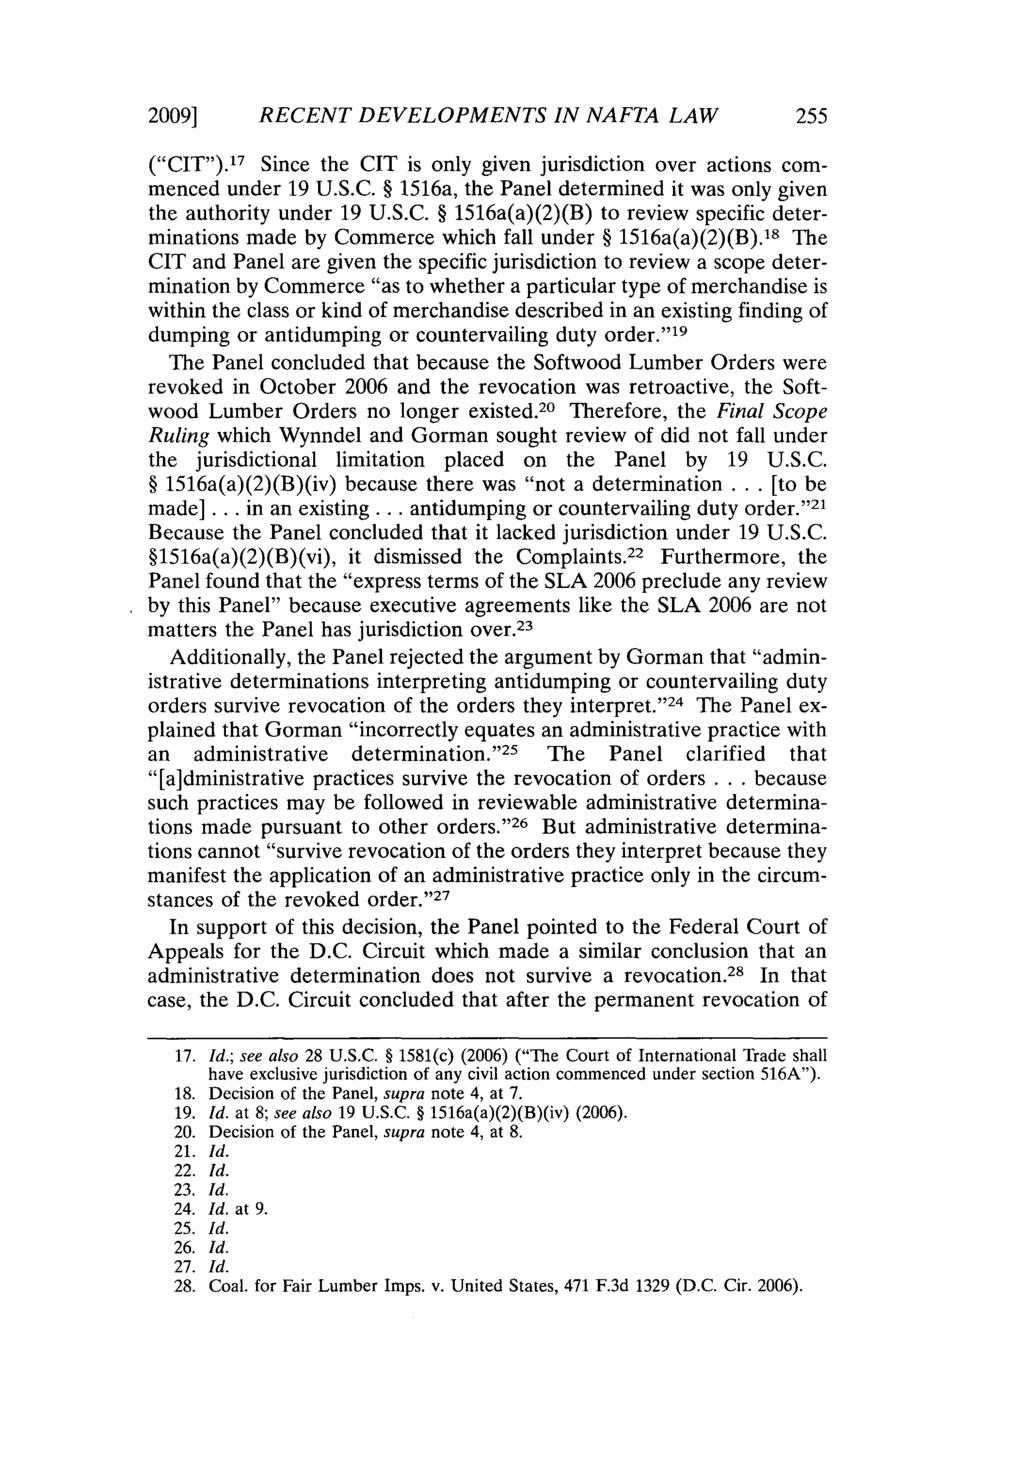 2009] RECENT DEVELOPMENTS IN NAFTA LAW ("CIT"). 17 Since the CIT is only given jurisdiction over actions commenced under 19 U.S.C. 1516a, the Panel determined it was only given the authority under 19 U.